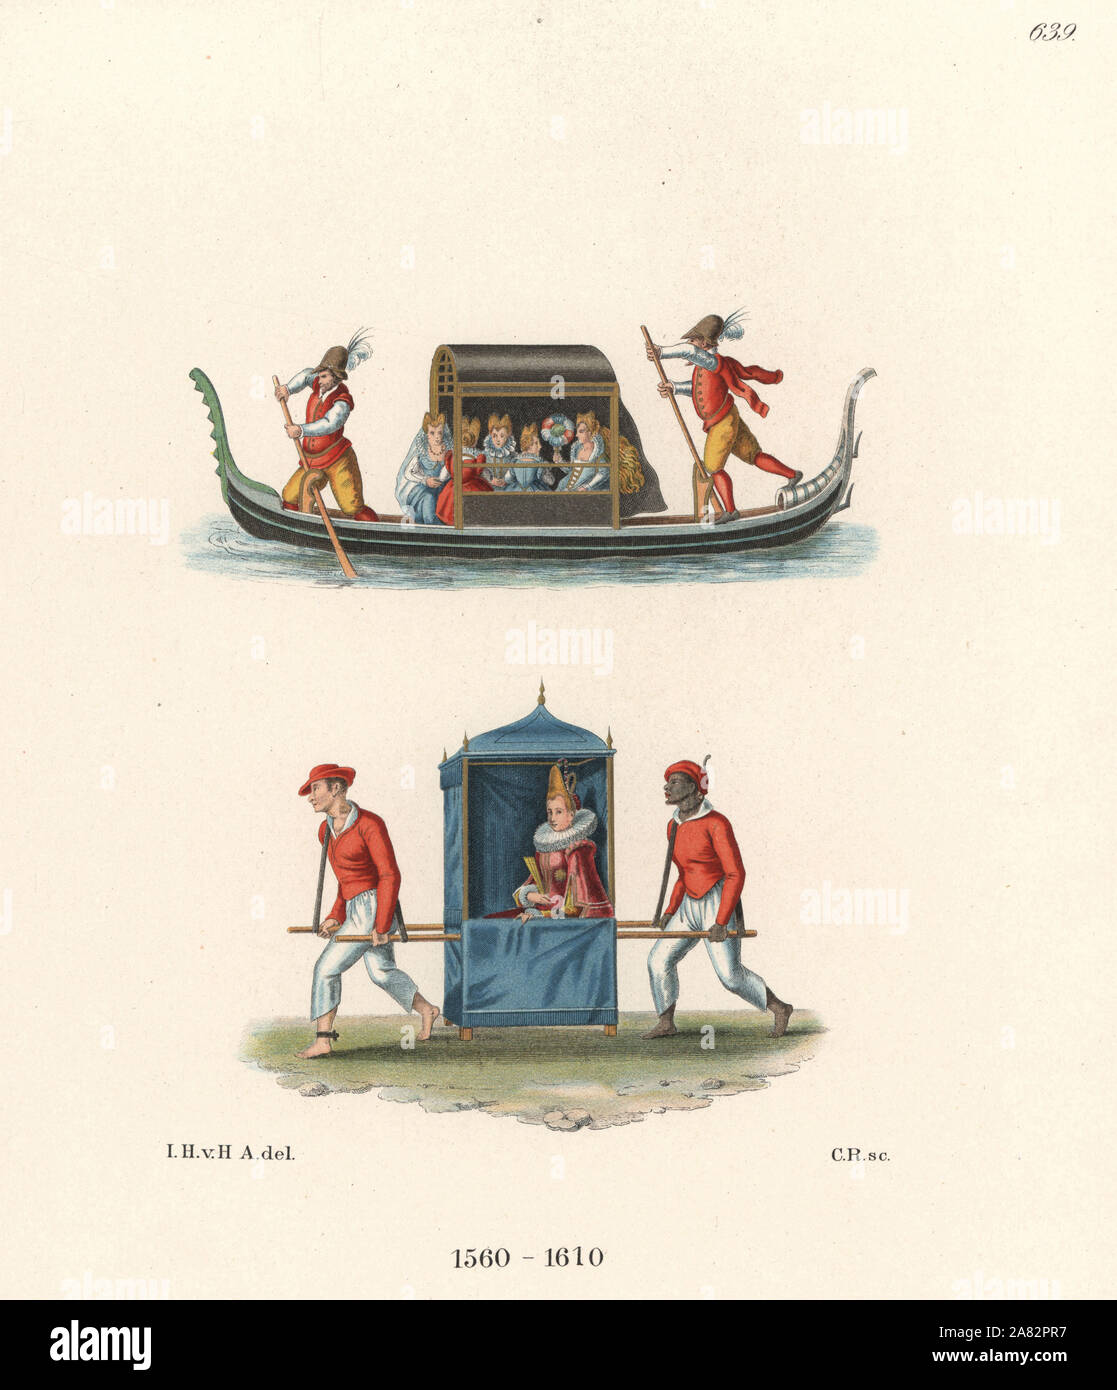 Women riding a Venetian gondola, and Napolitan woman in sedan chair carried by slaves. Chromolithograph from Hefner-Alteneck's Costumes, Artworks and Appliances from the Middle Ages to the 17th Century, Frankfurt, 1889. Illustration by Dr. Jakob Heinrich von Hefner-Alteneck, lithographed by C. Regnier. Dr. Hefner-Alteneck (1811-1903) was a German museum curator, archaeologist, art historian, illustrator and etcher. Stock Photo